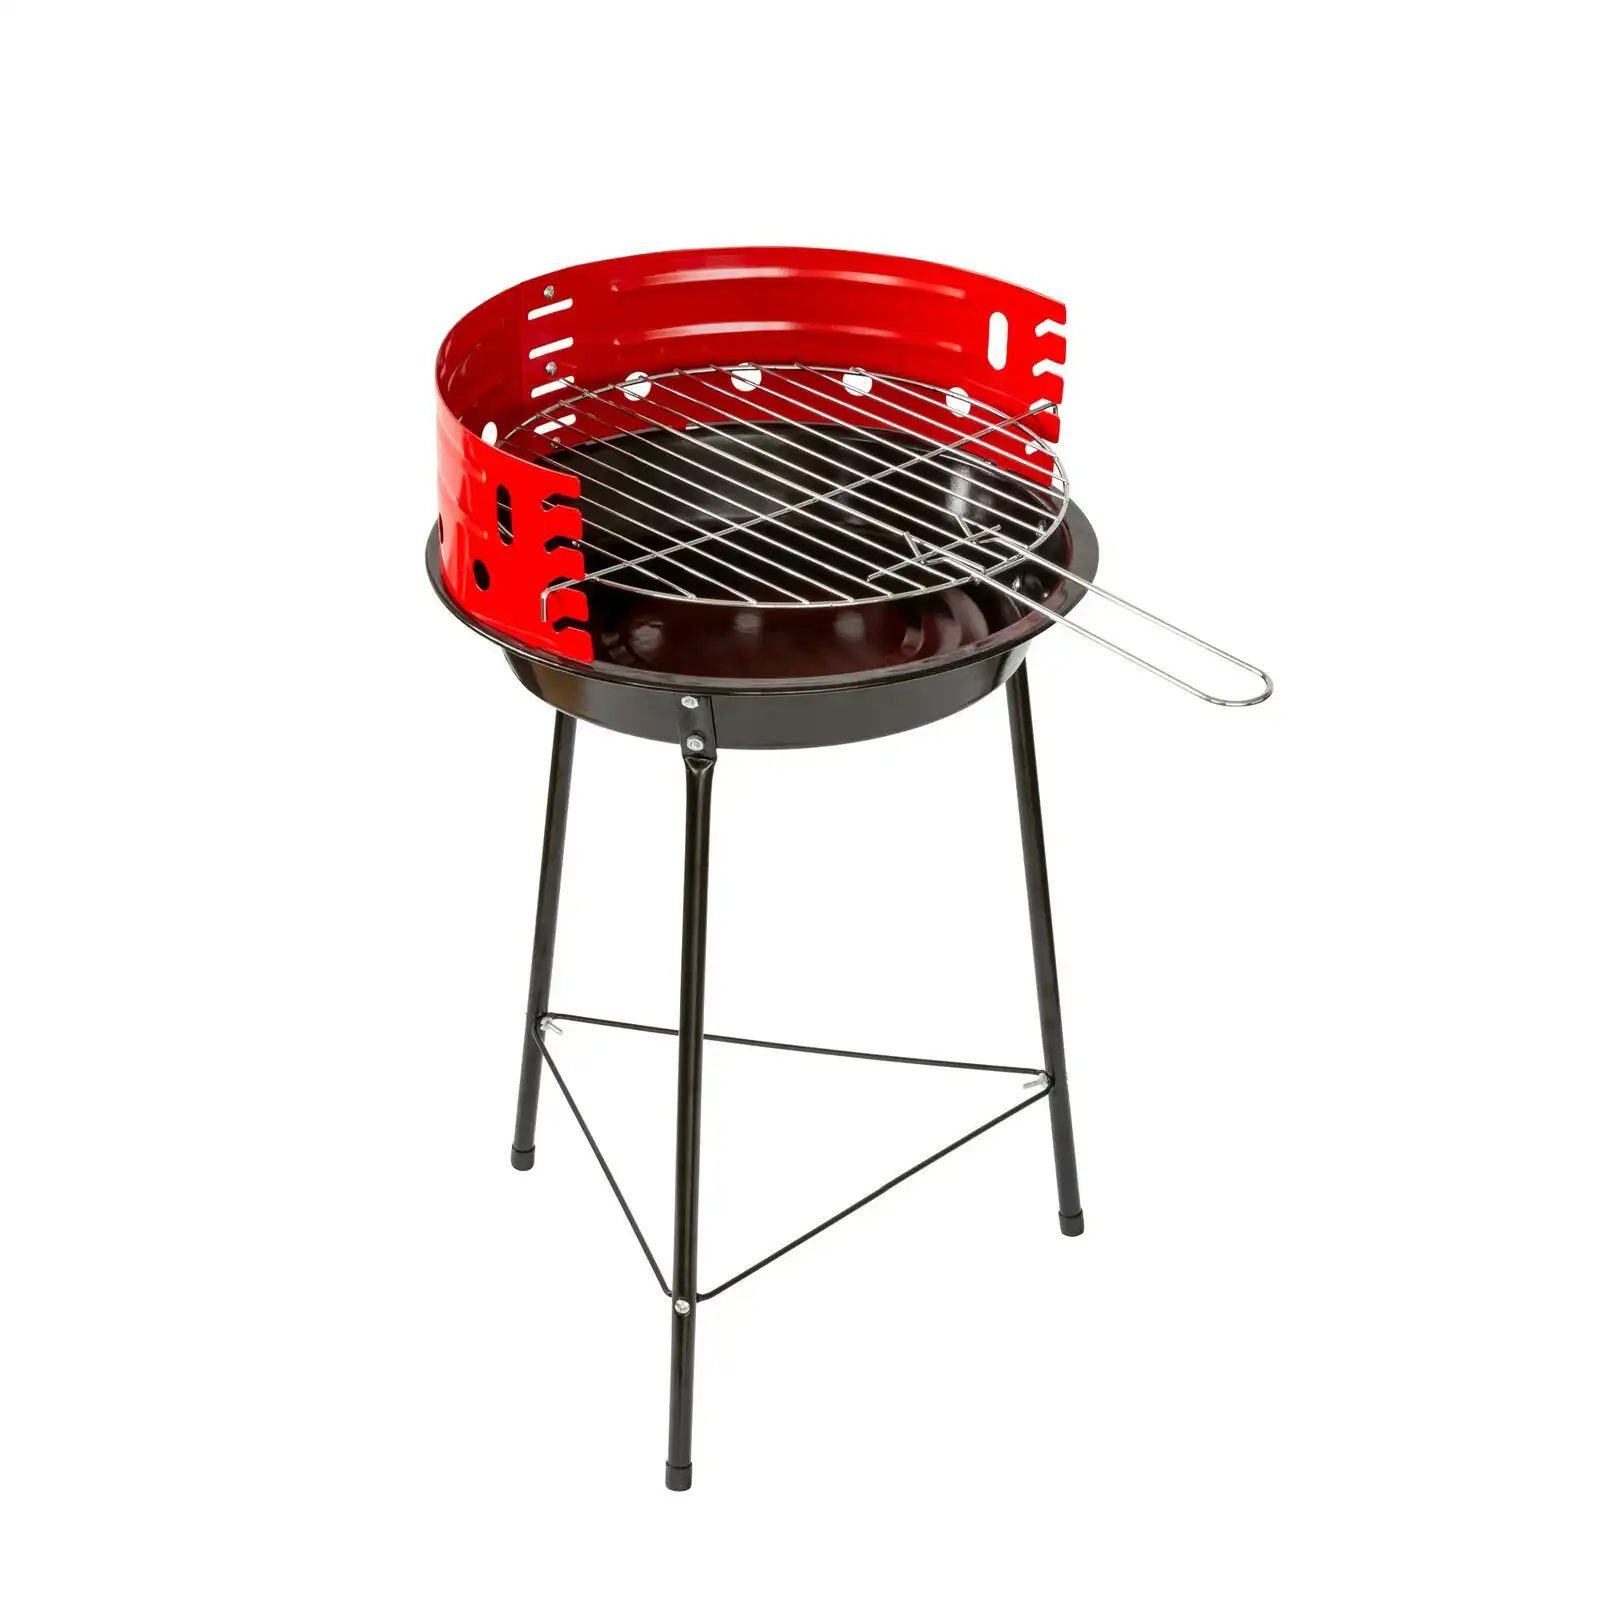 13" Portable Charcoal Grill